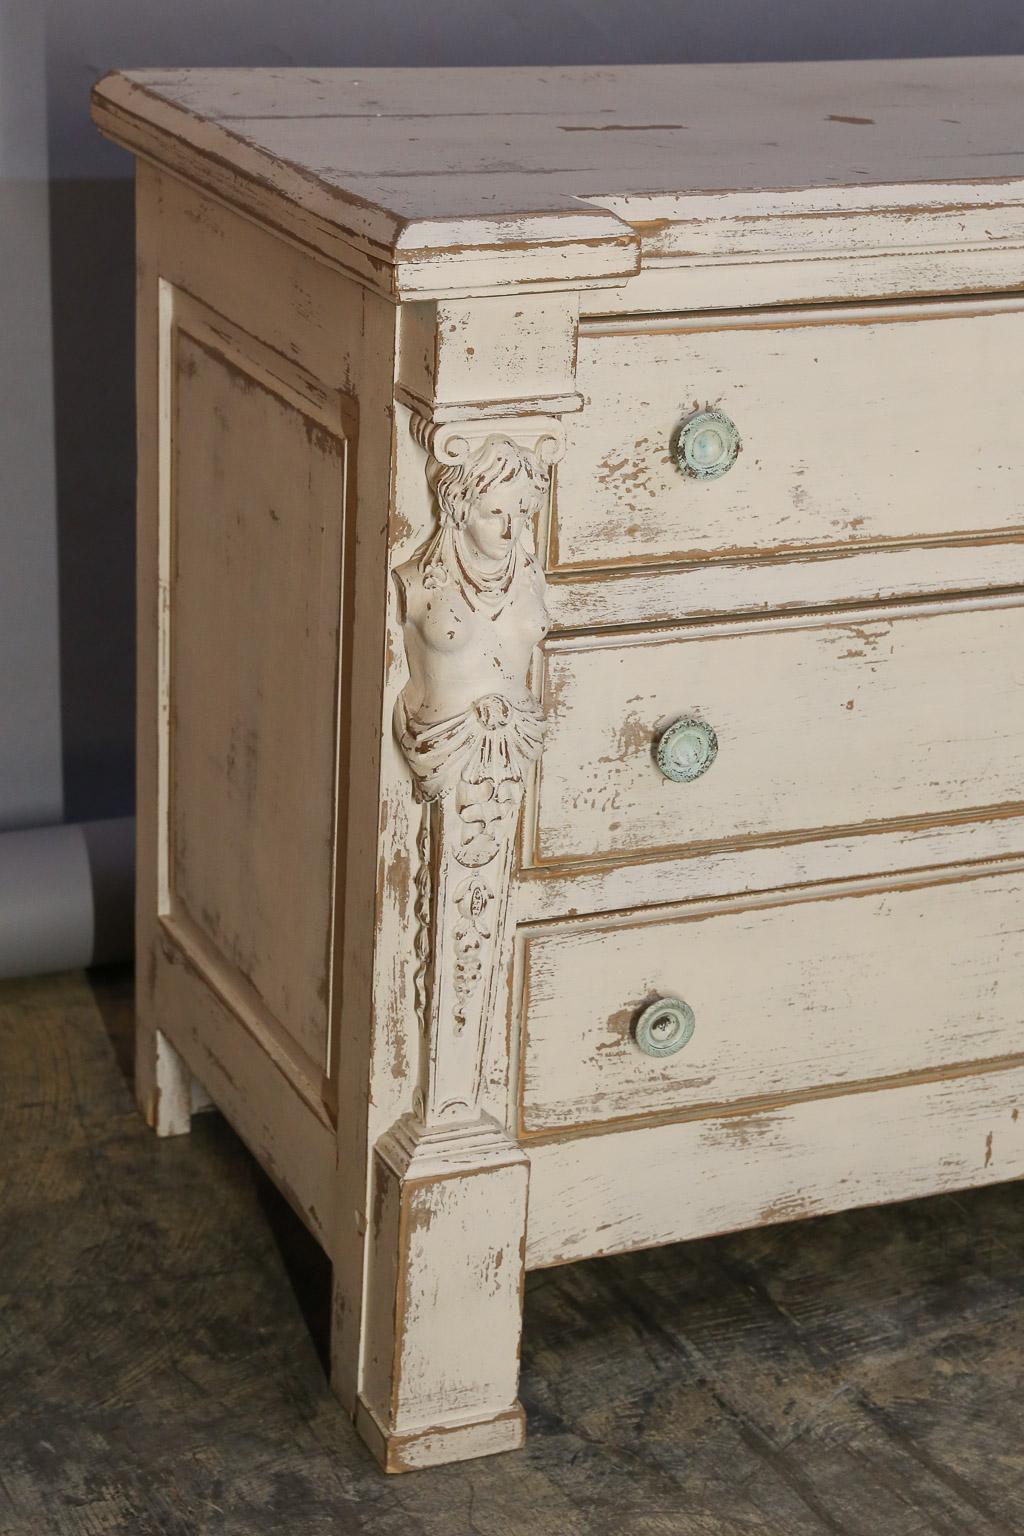 Chest with six drawers has been painted and hand-distressed to look old.

Each side of chest features a carved carytid, in the neoclassical manner,
as the only ornamentation aside from paneled sides.

White distressed mirror is a companion